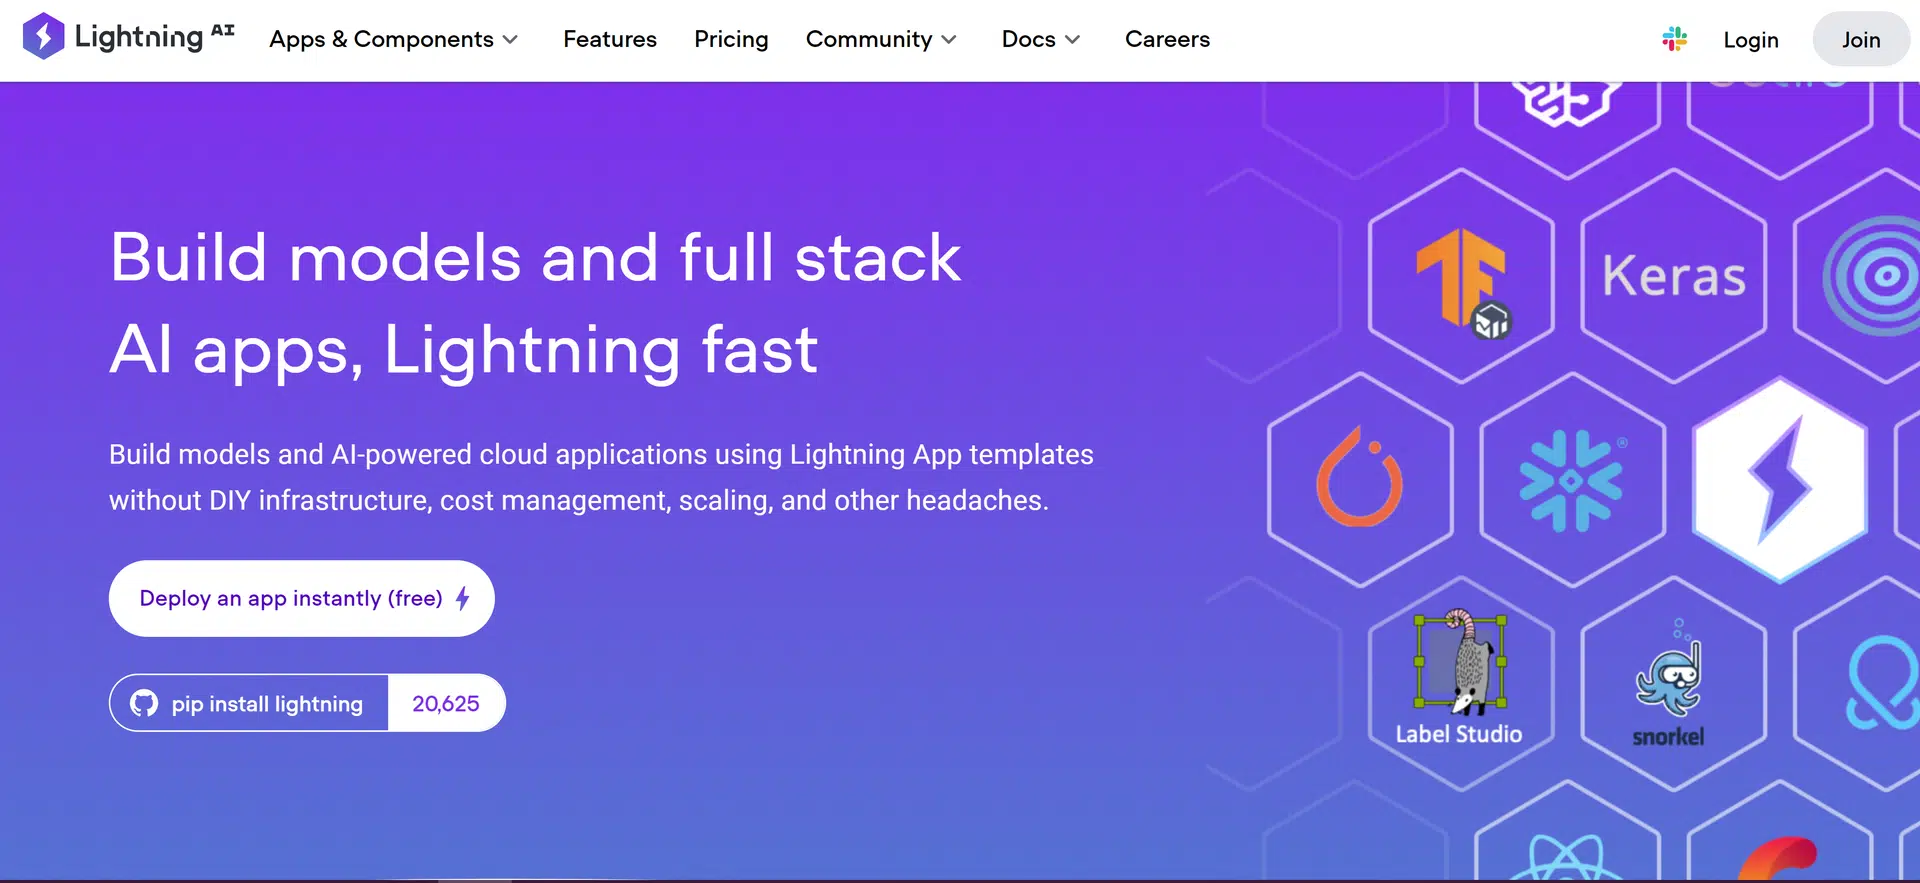 Lightning AIwebsite picture